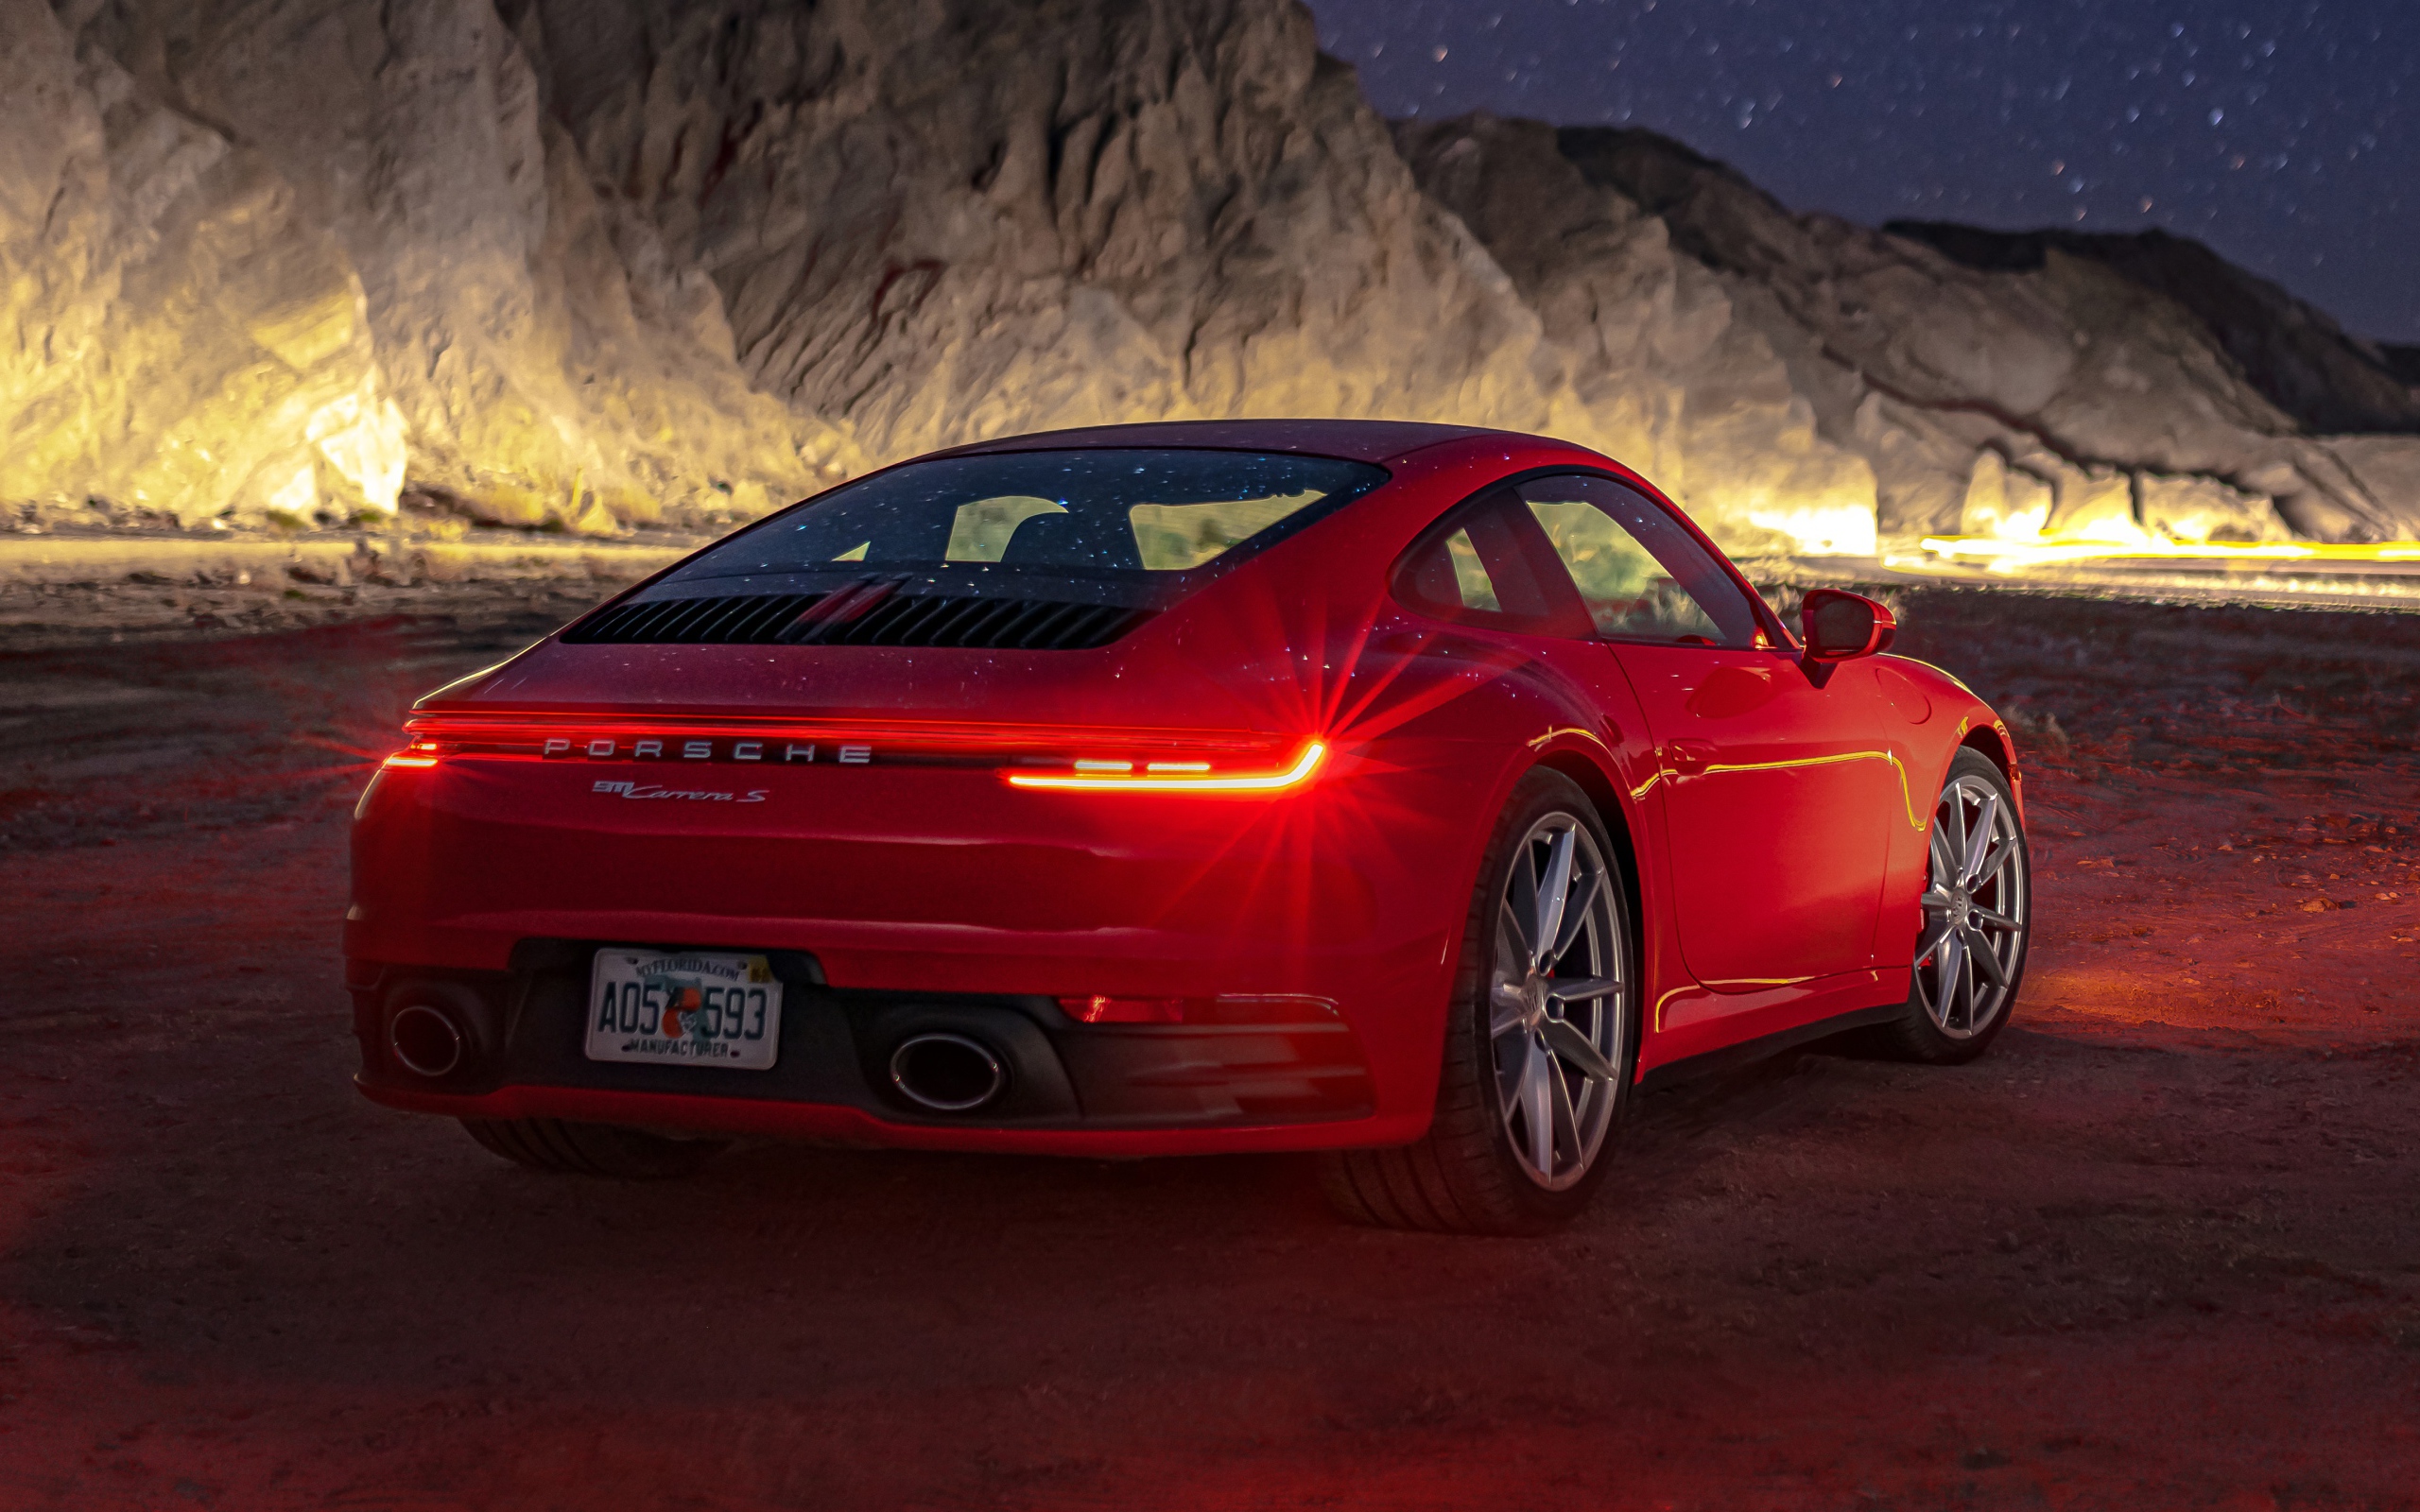 Red car Porsche 911 Carrera S, 2020 in the mountains at night